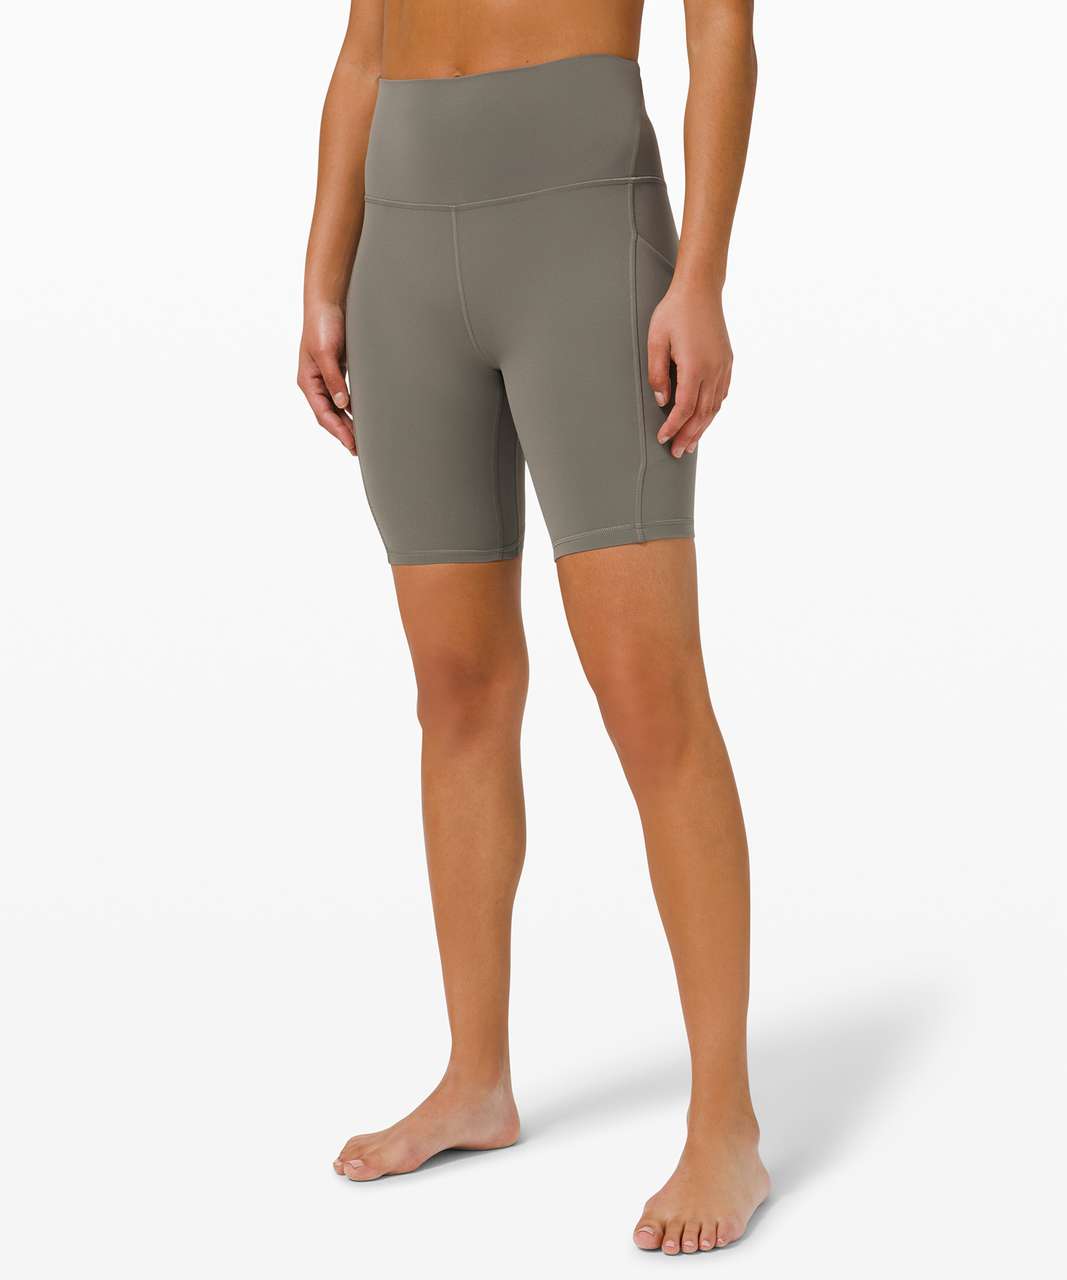 Grey Sage super high rise 10” align shorts! Posted here a few days